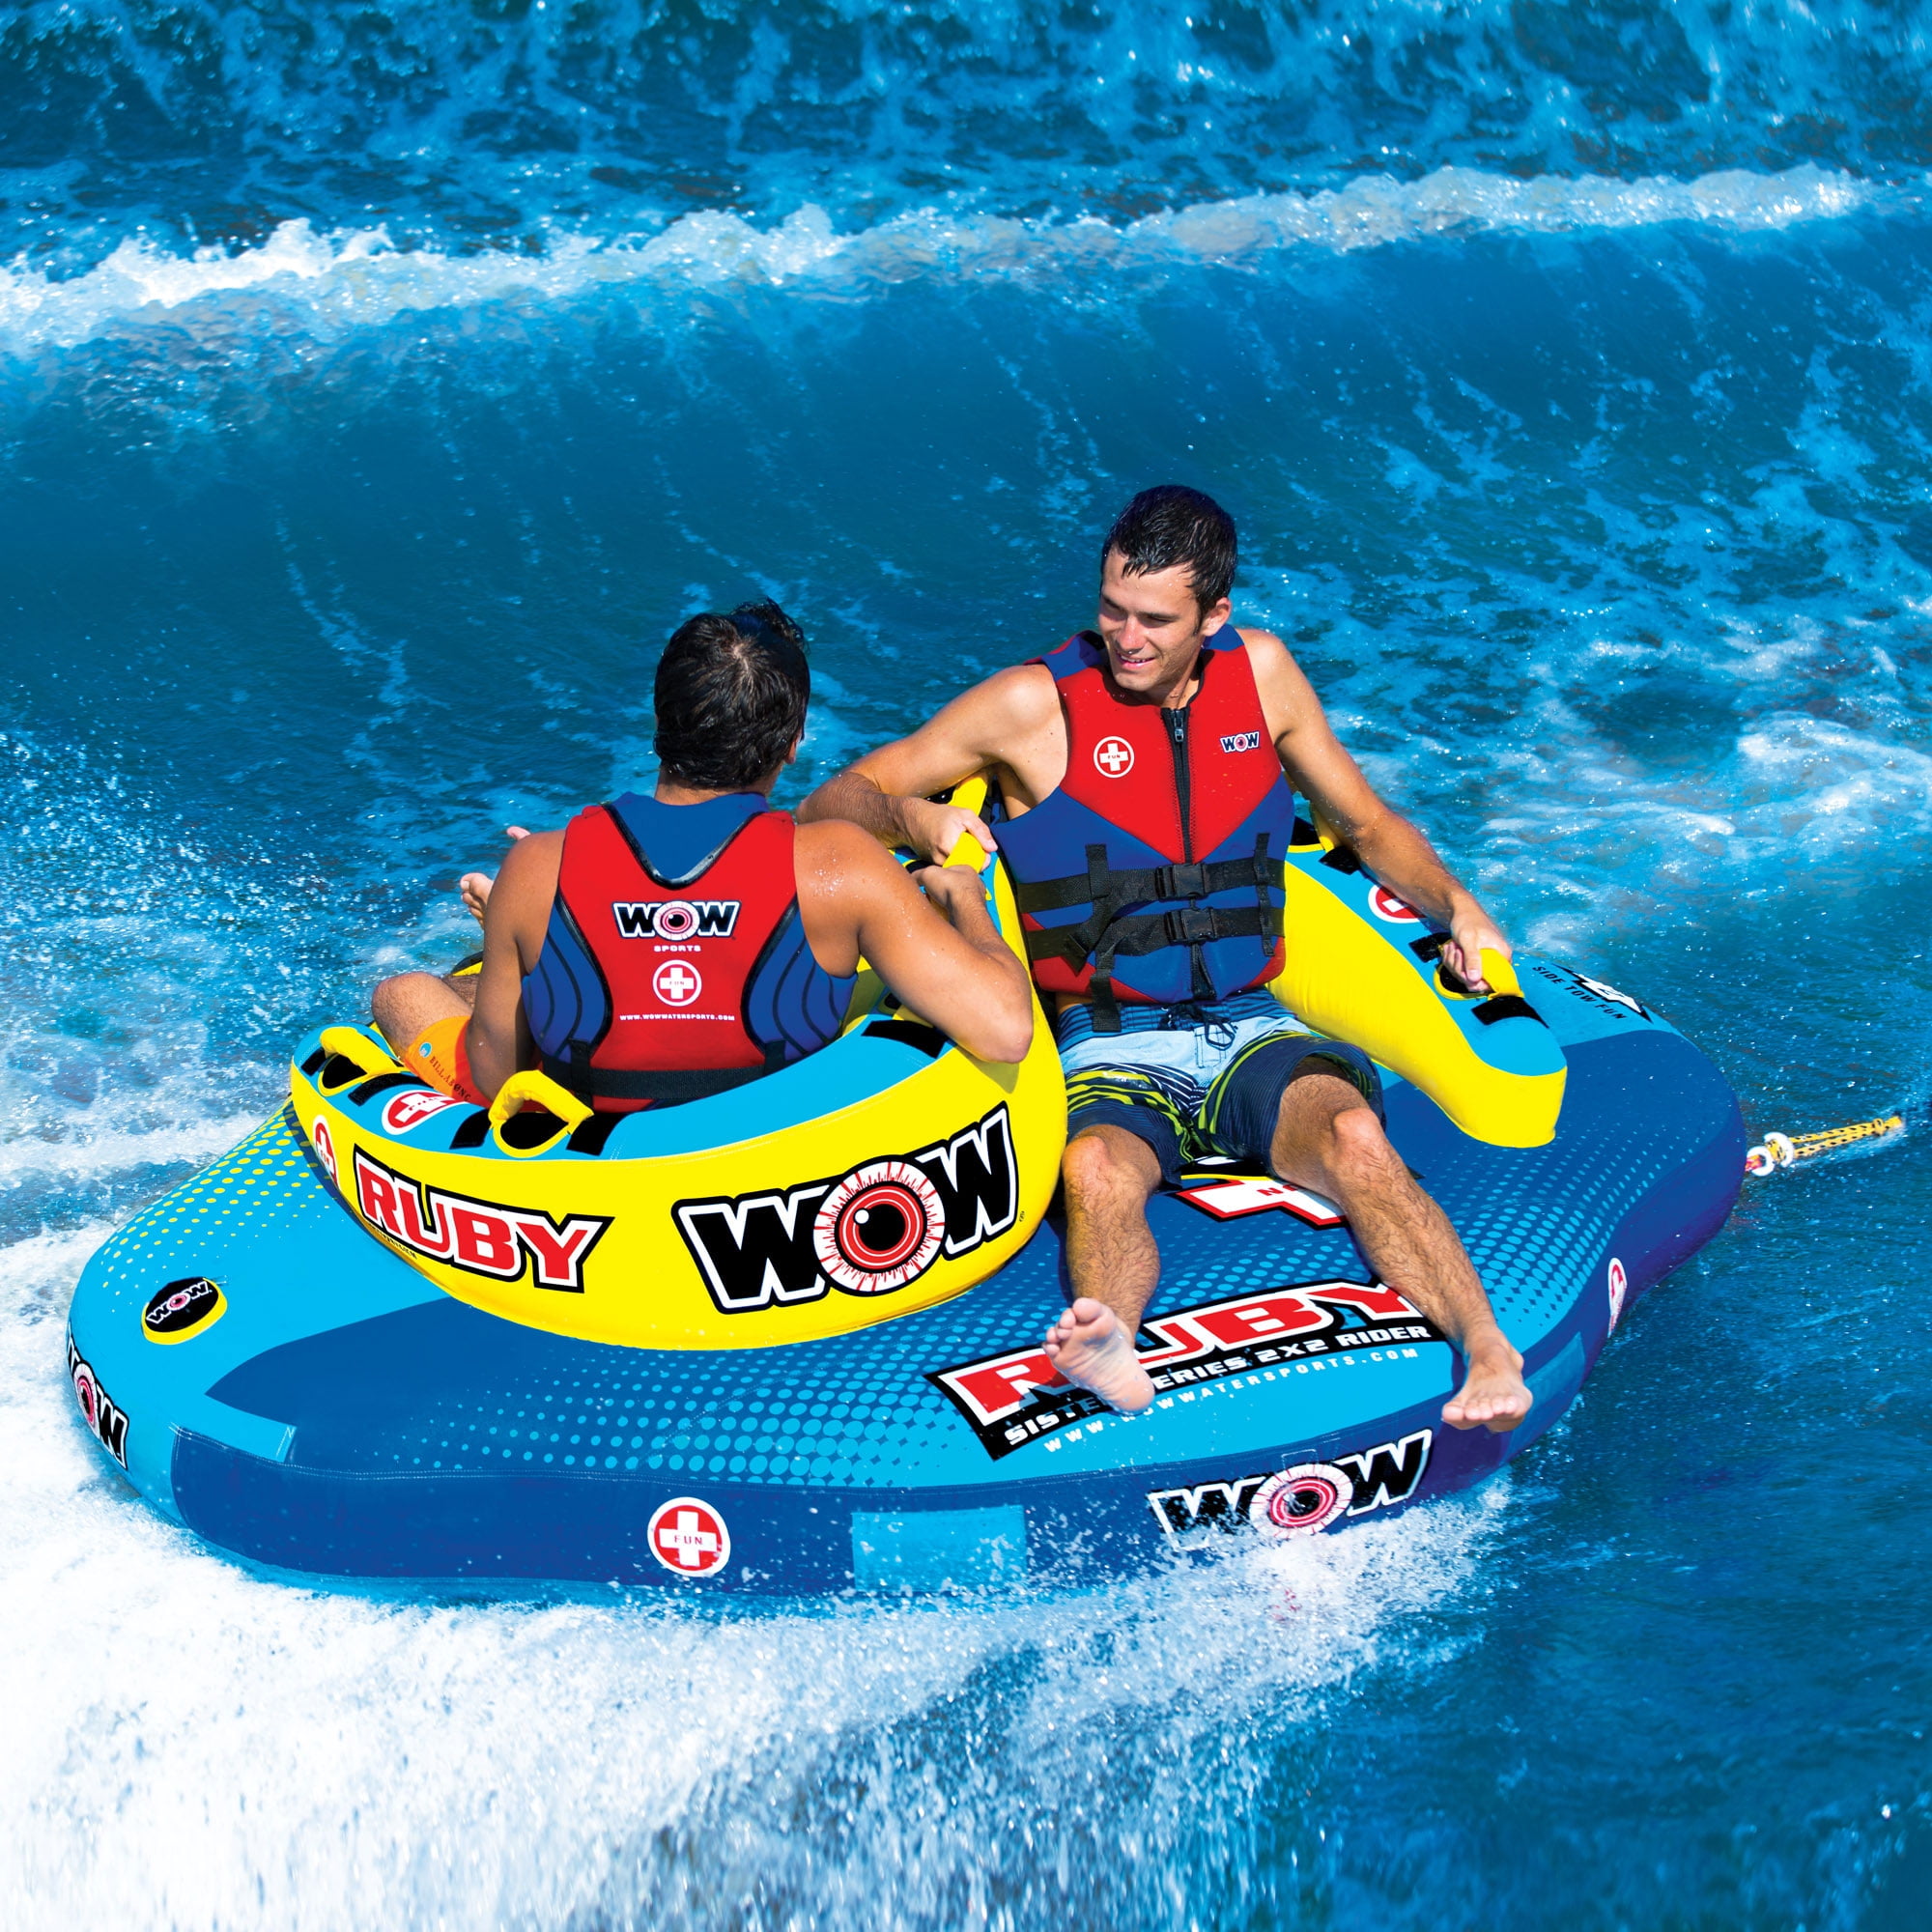 Blue & Yellow15-1060 WOW Watersports Ruby 2 Rider Towable Tube 